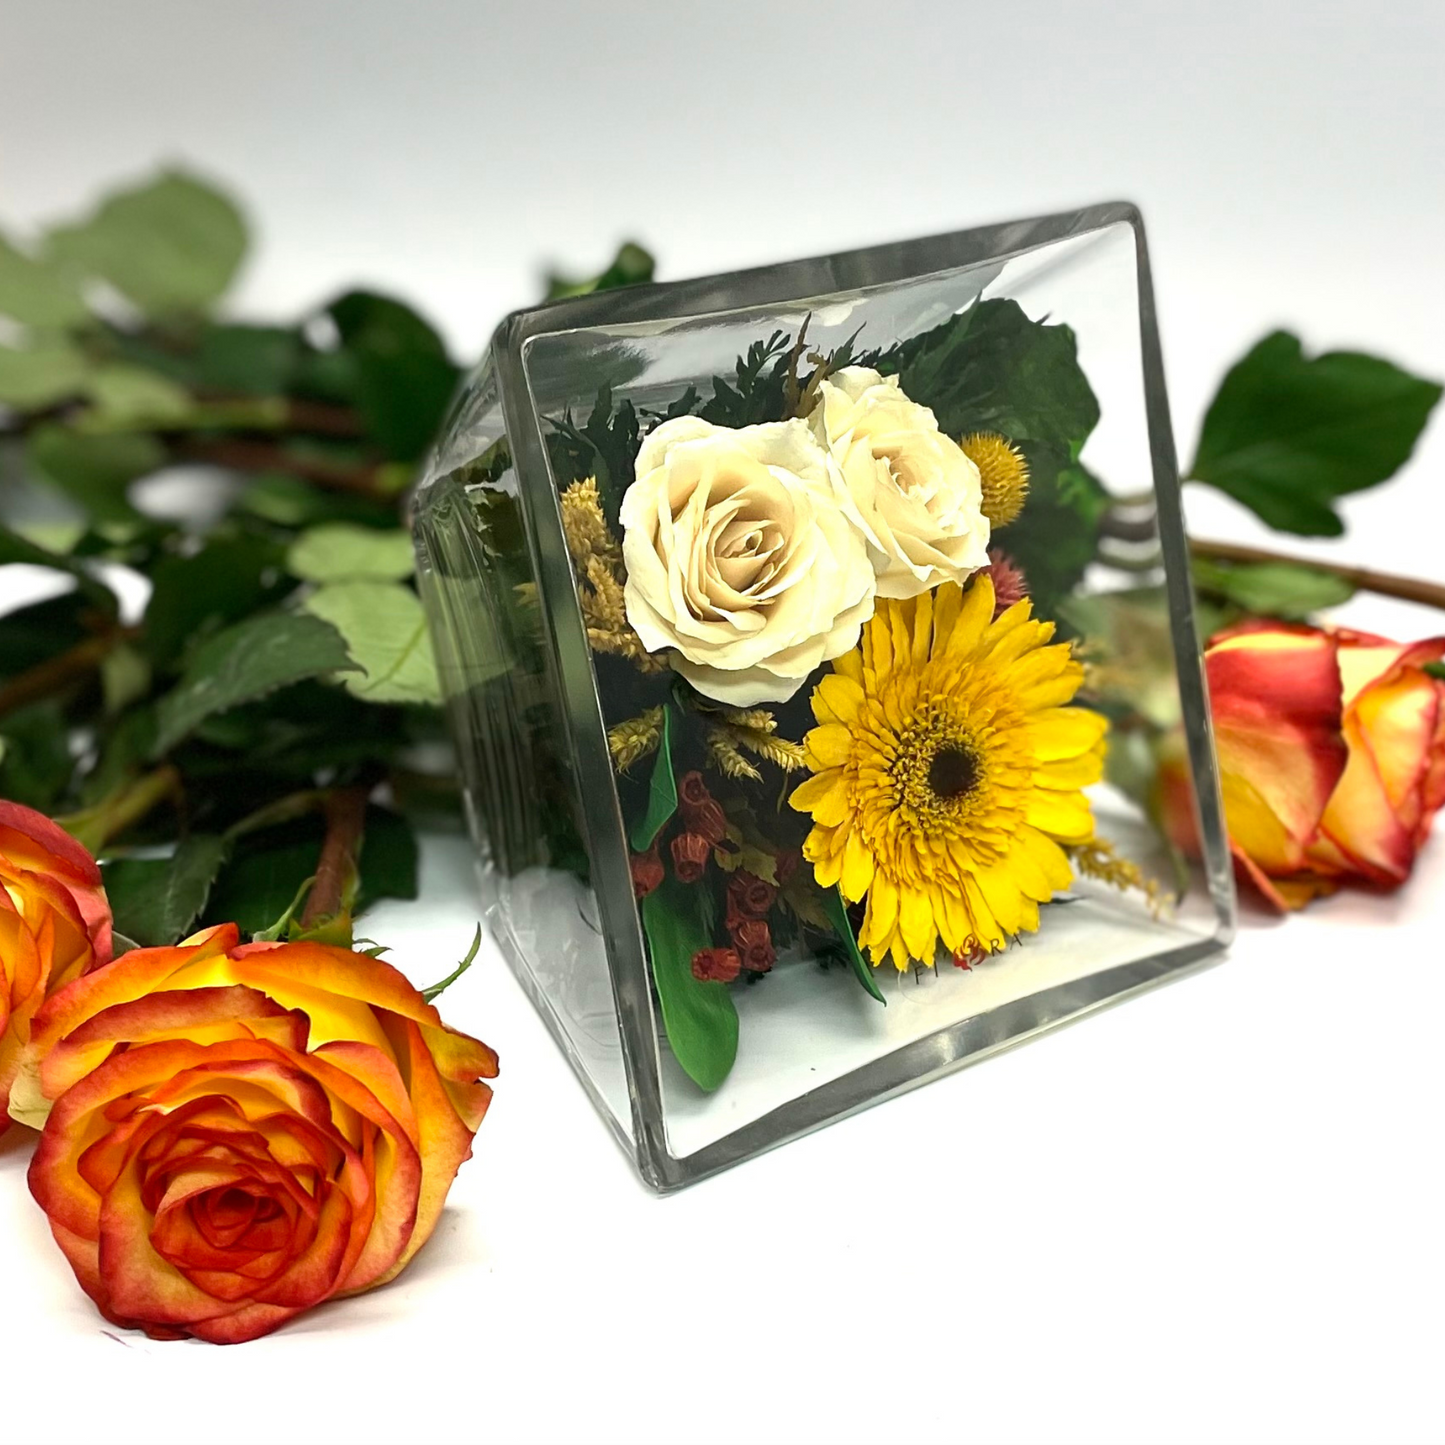 69475 Long-Lasting Roses and Gerbera in a Glass Vase